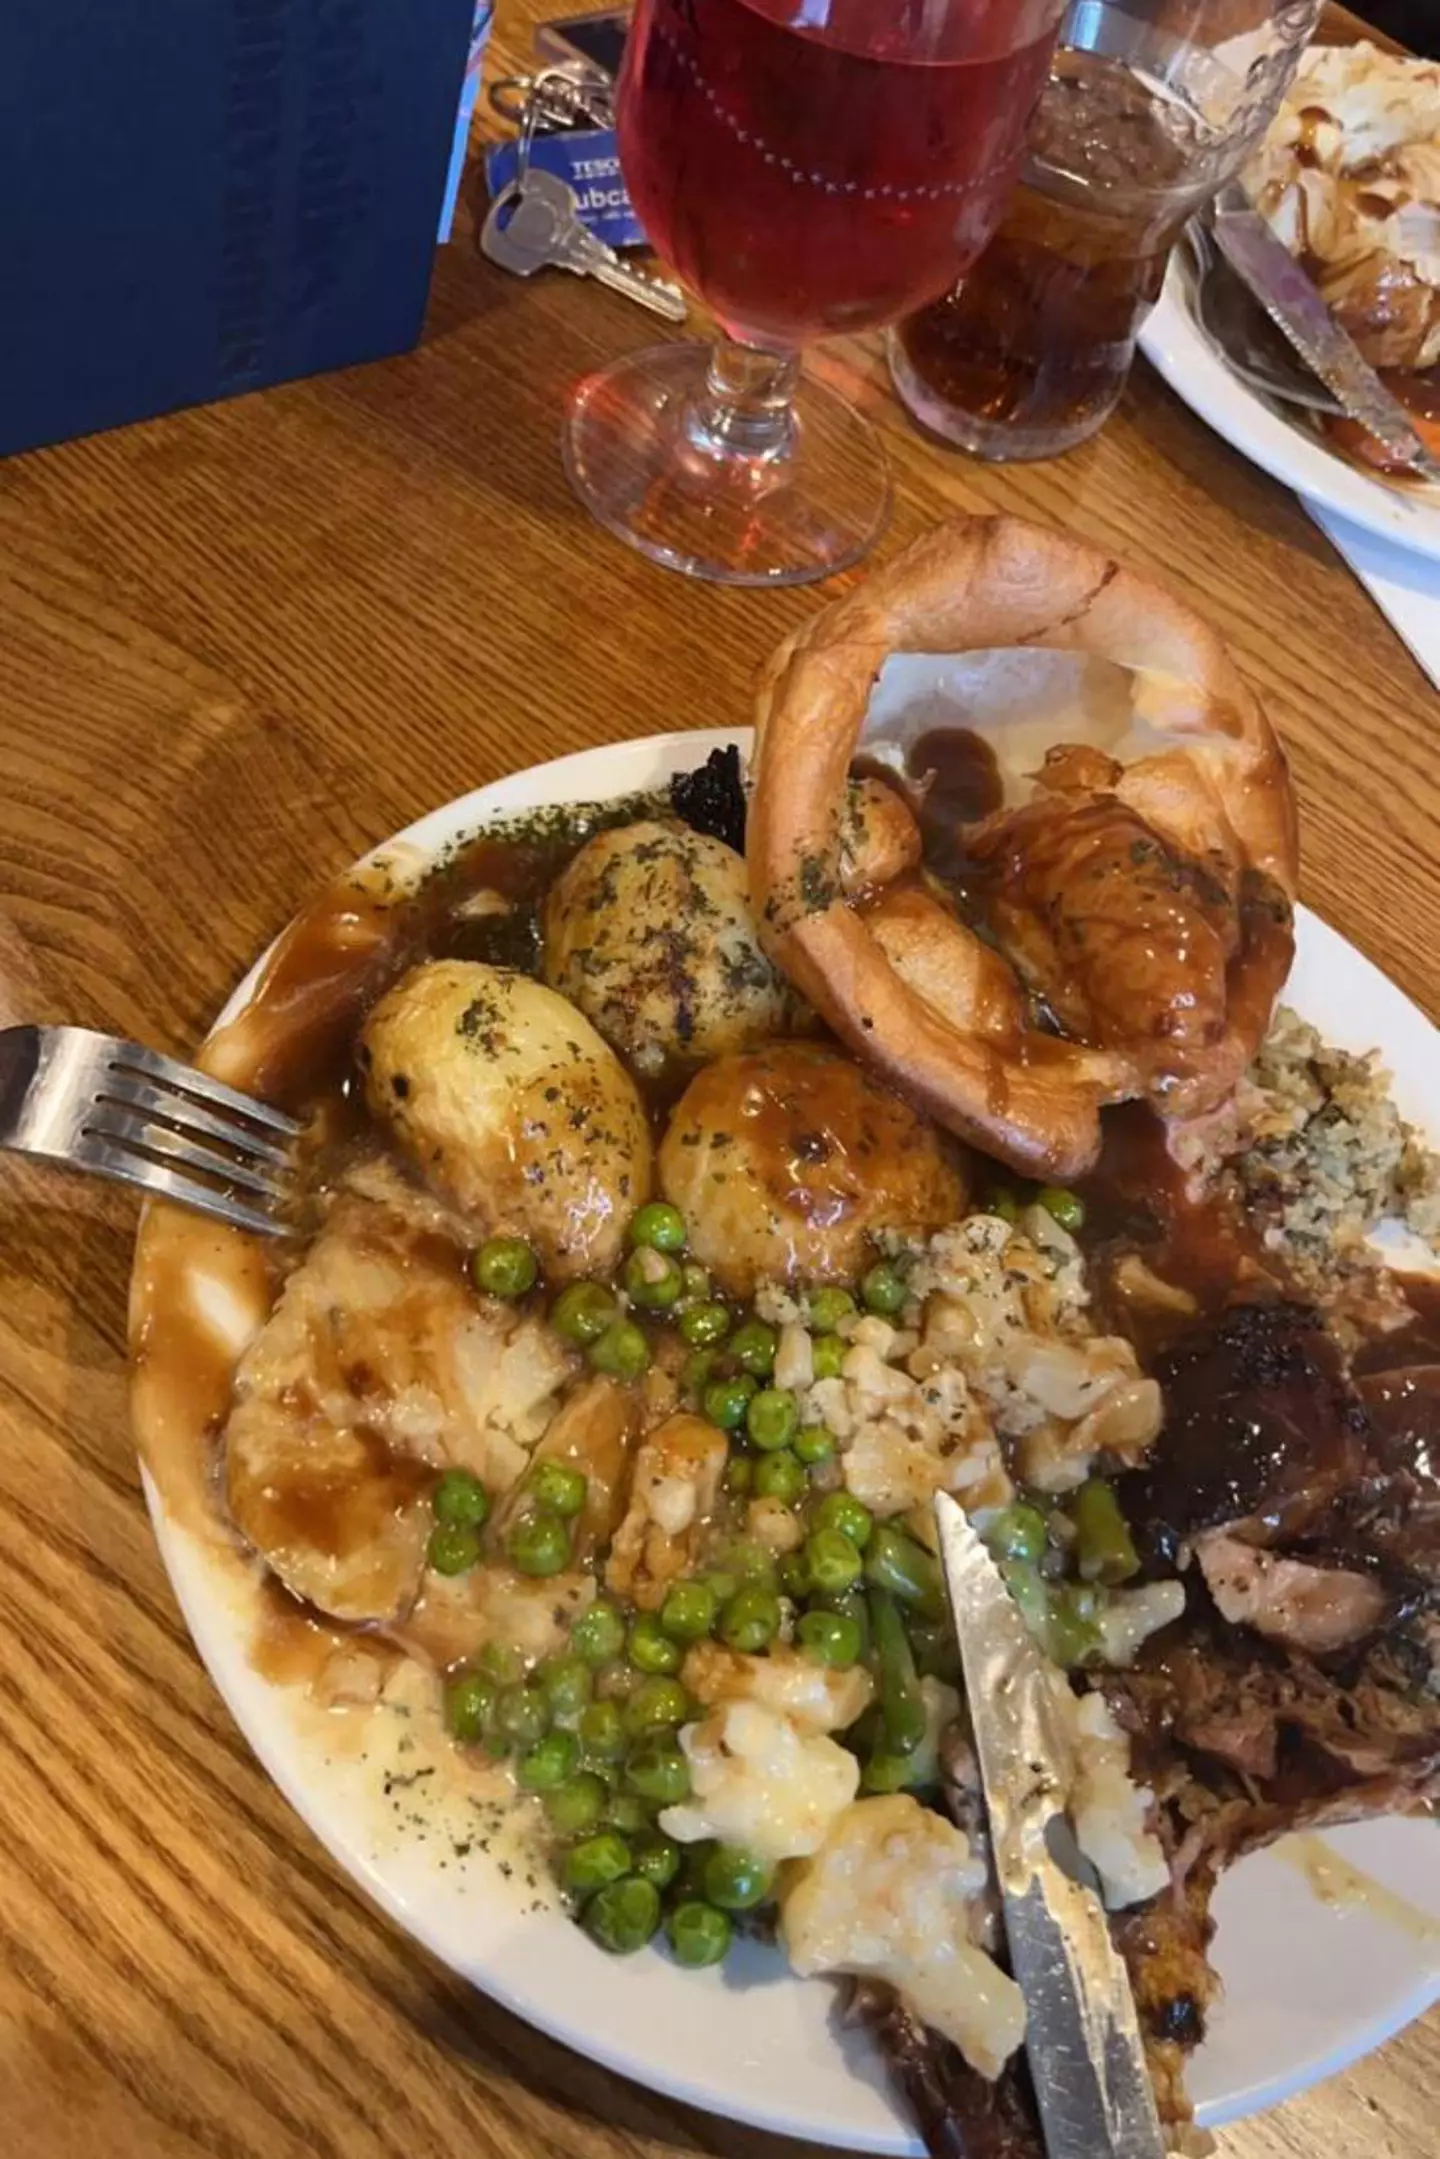 The Toby Carvery roast is a staple of British culture.